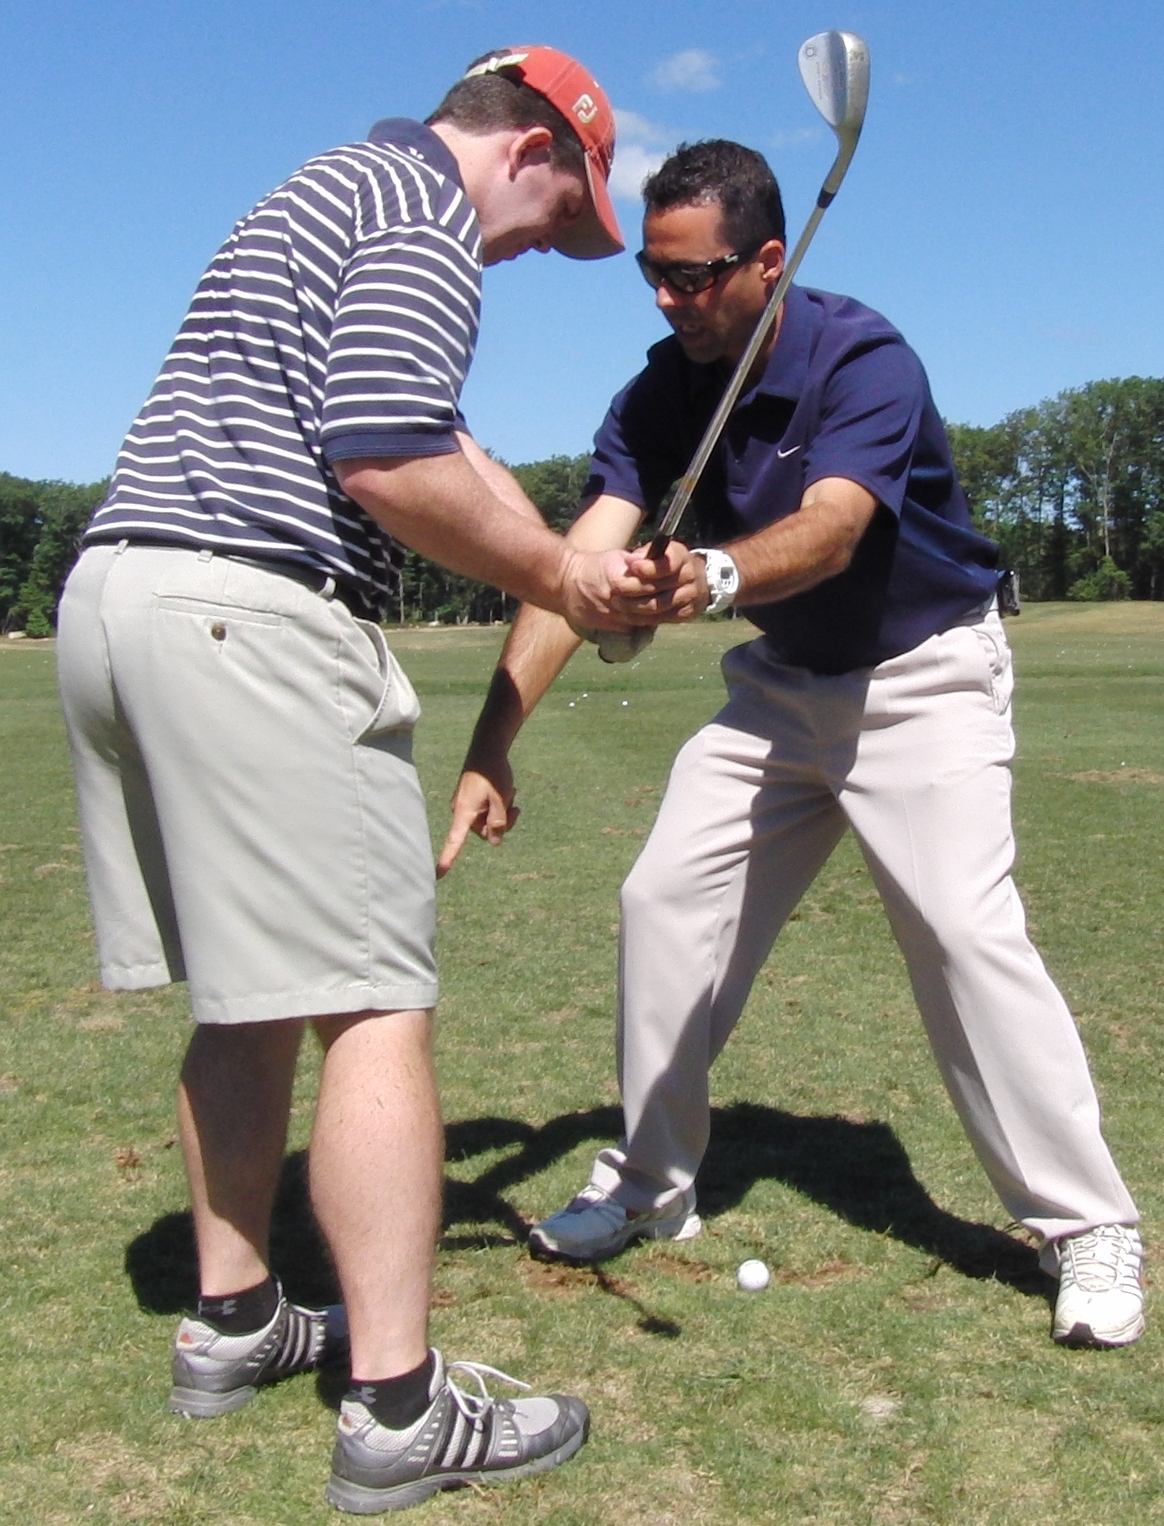 Are Private Golf Lessons For You? — Dennis sales golf